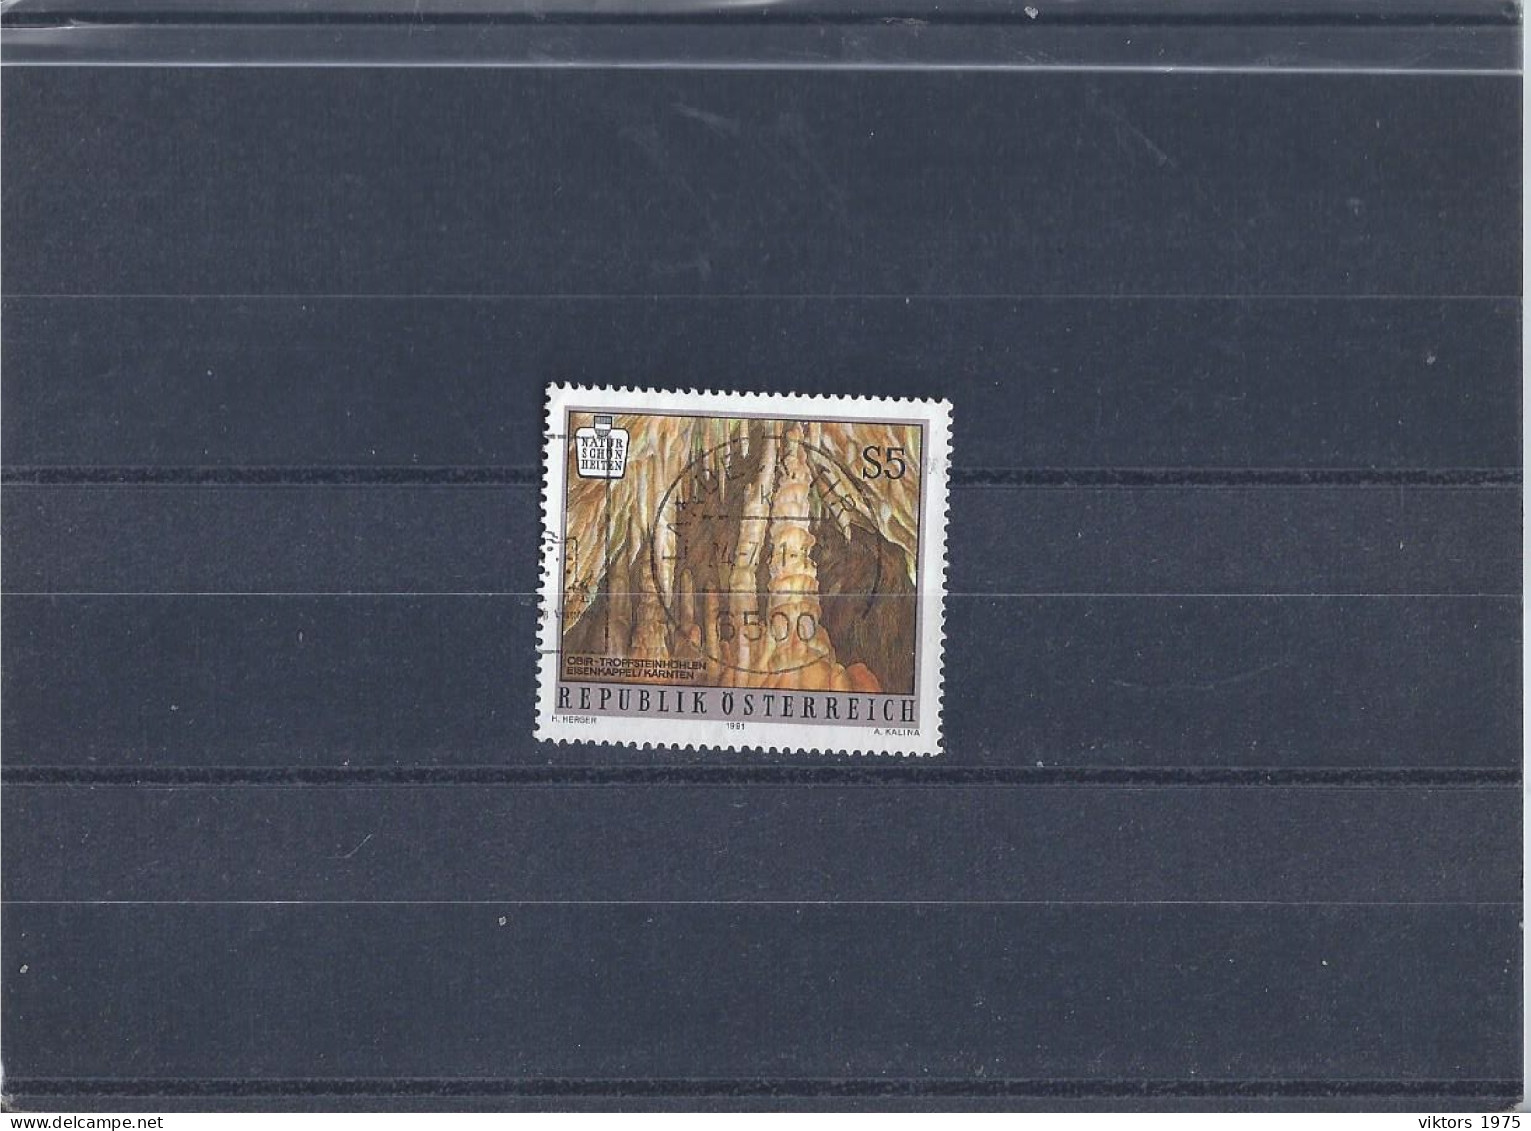 Used Stamp Nr.2023 In MICHEL Catalog - Used Stamps